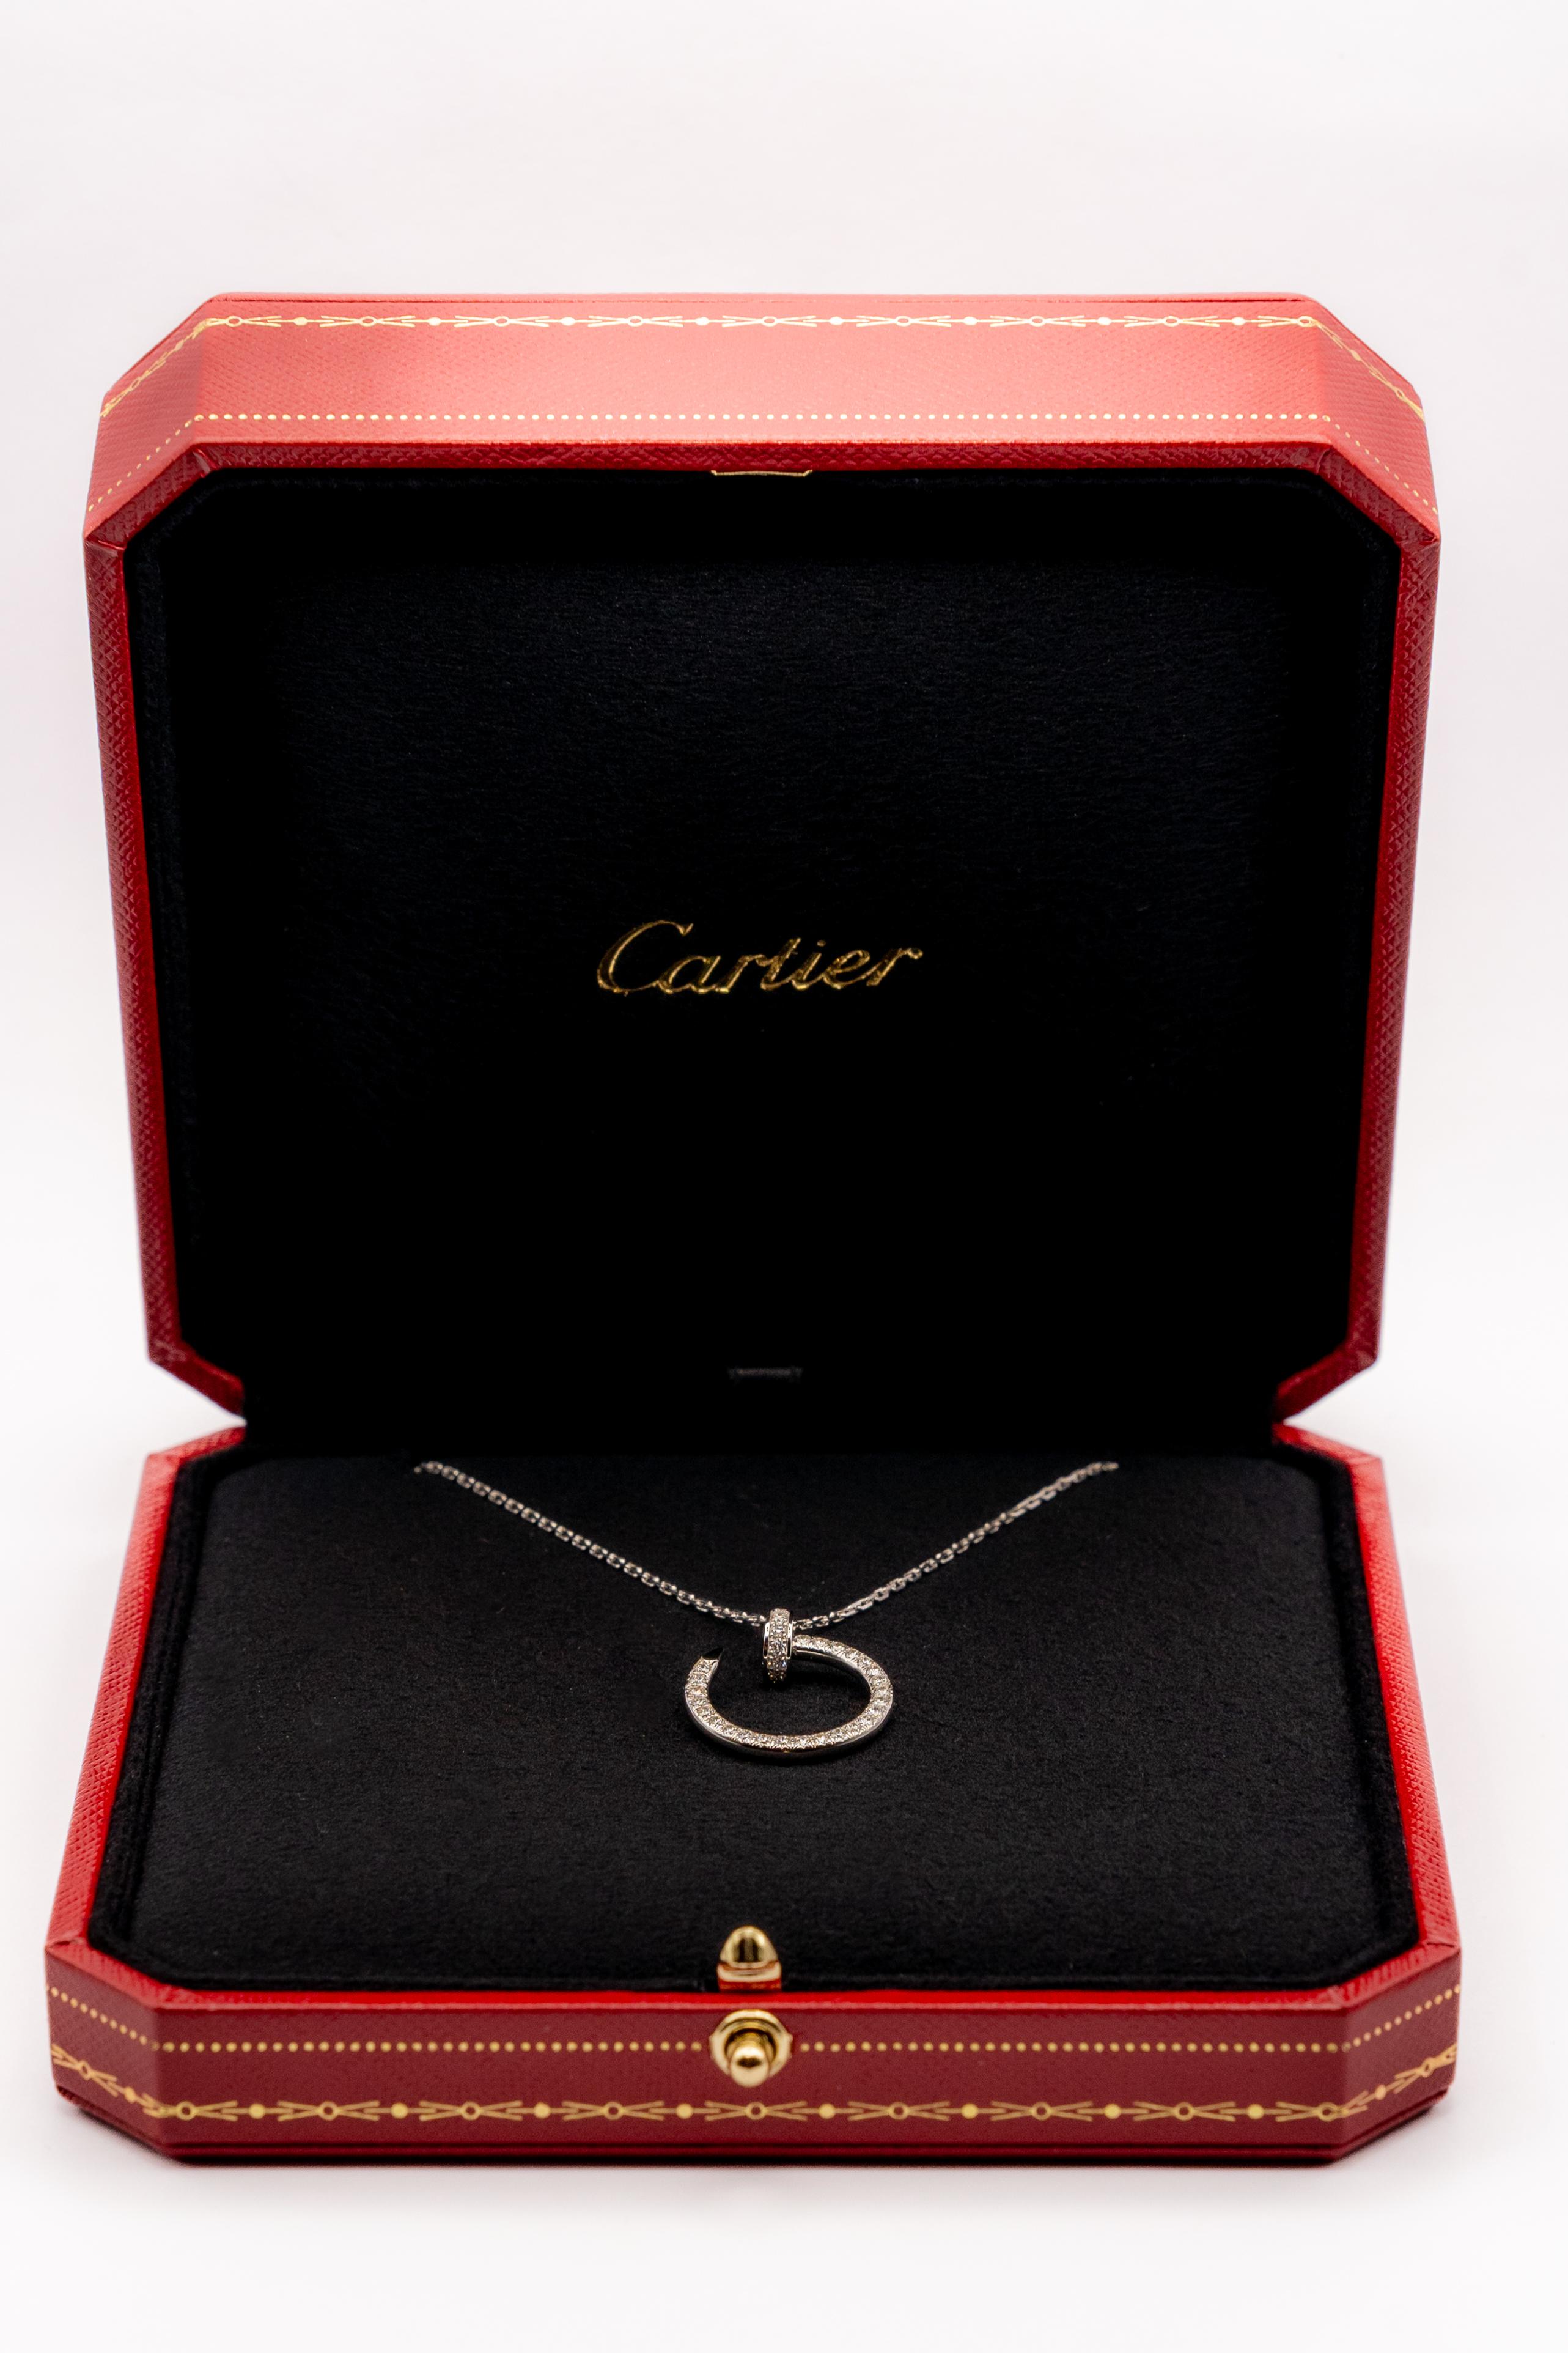 Authentic Cartier Juste un Clou pendant crafted in 18 karat withe gold on an oval-link chain. The pendant is set with approx. 0.38 carats of round brilliant cut diamonds (E-F color, VS clarity) and is situated on 40,5 cm  adjustable chain. Signed